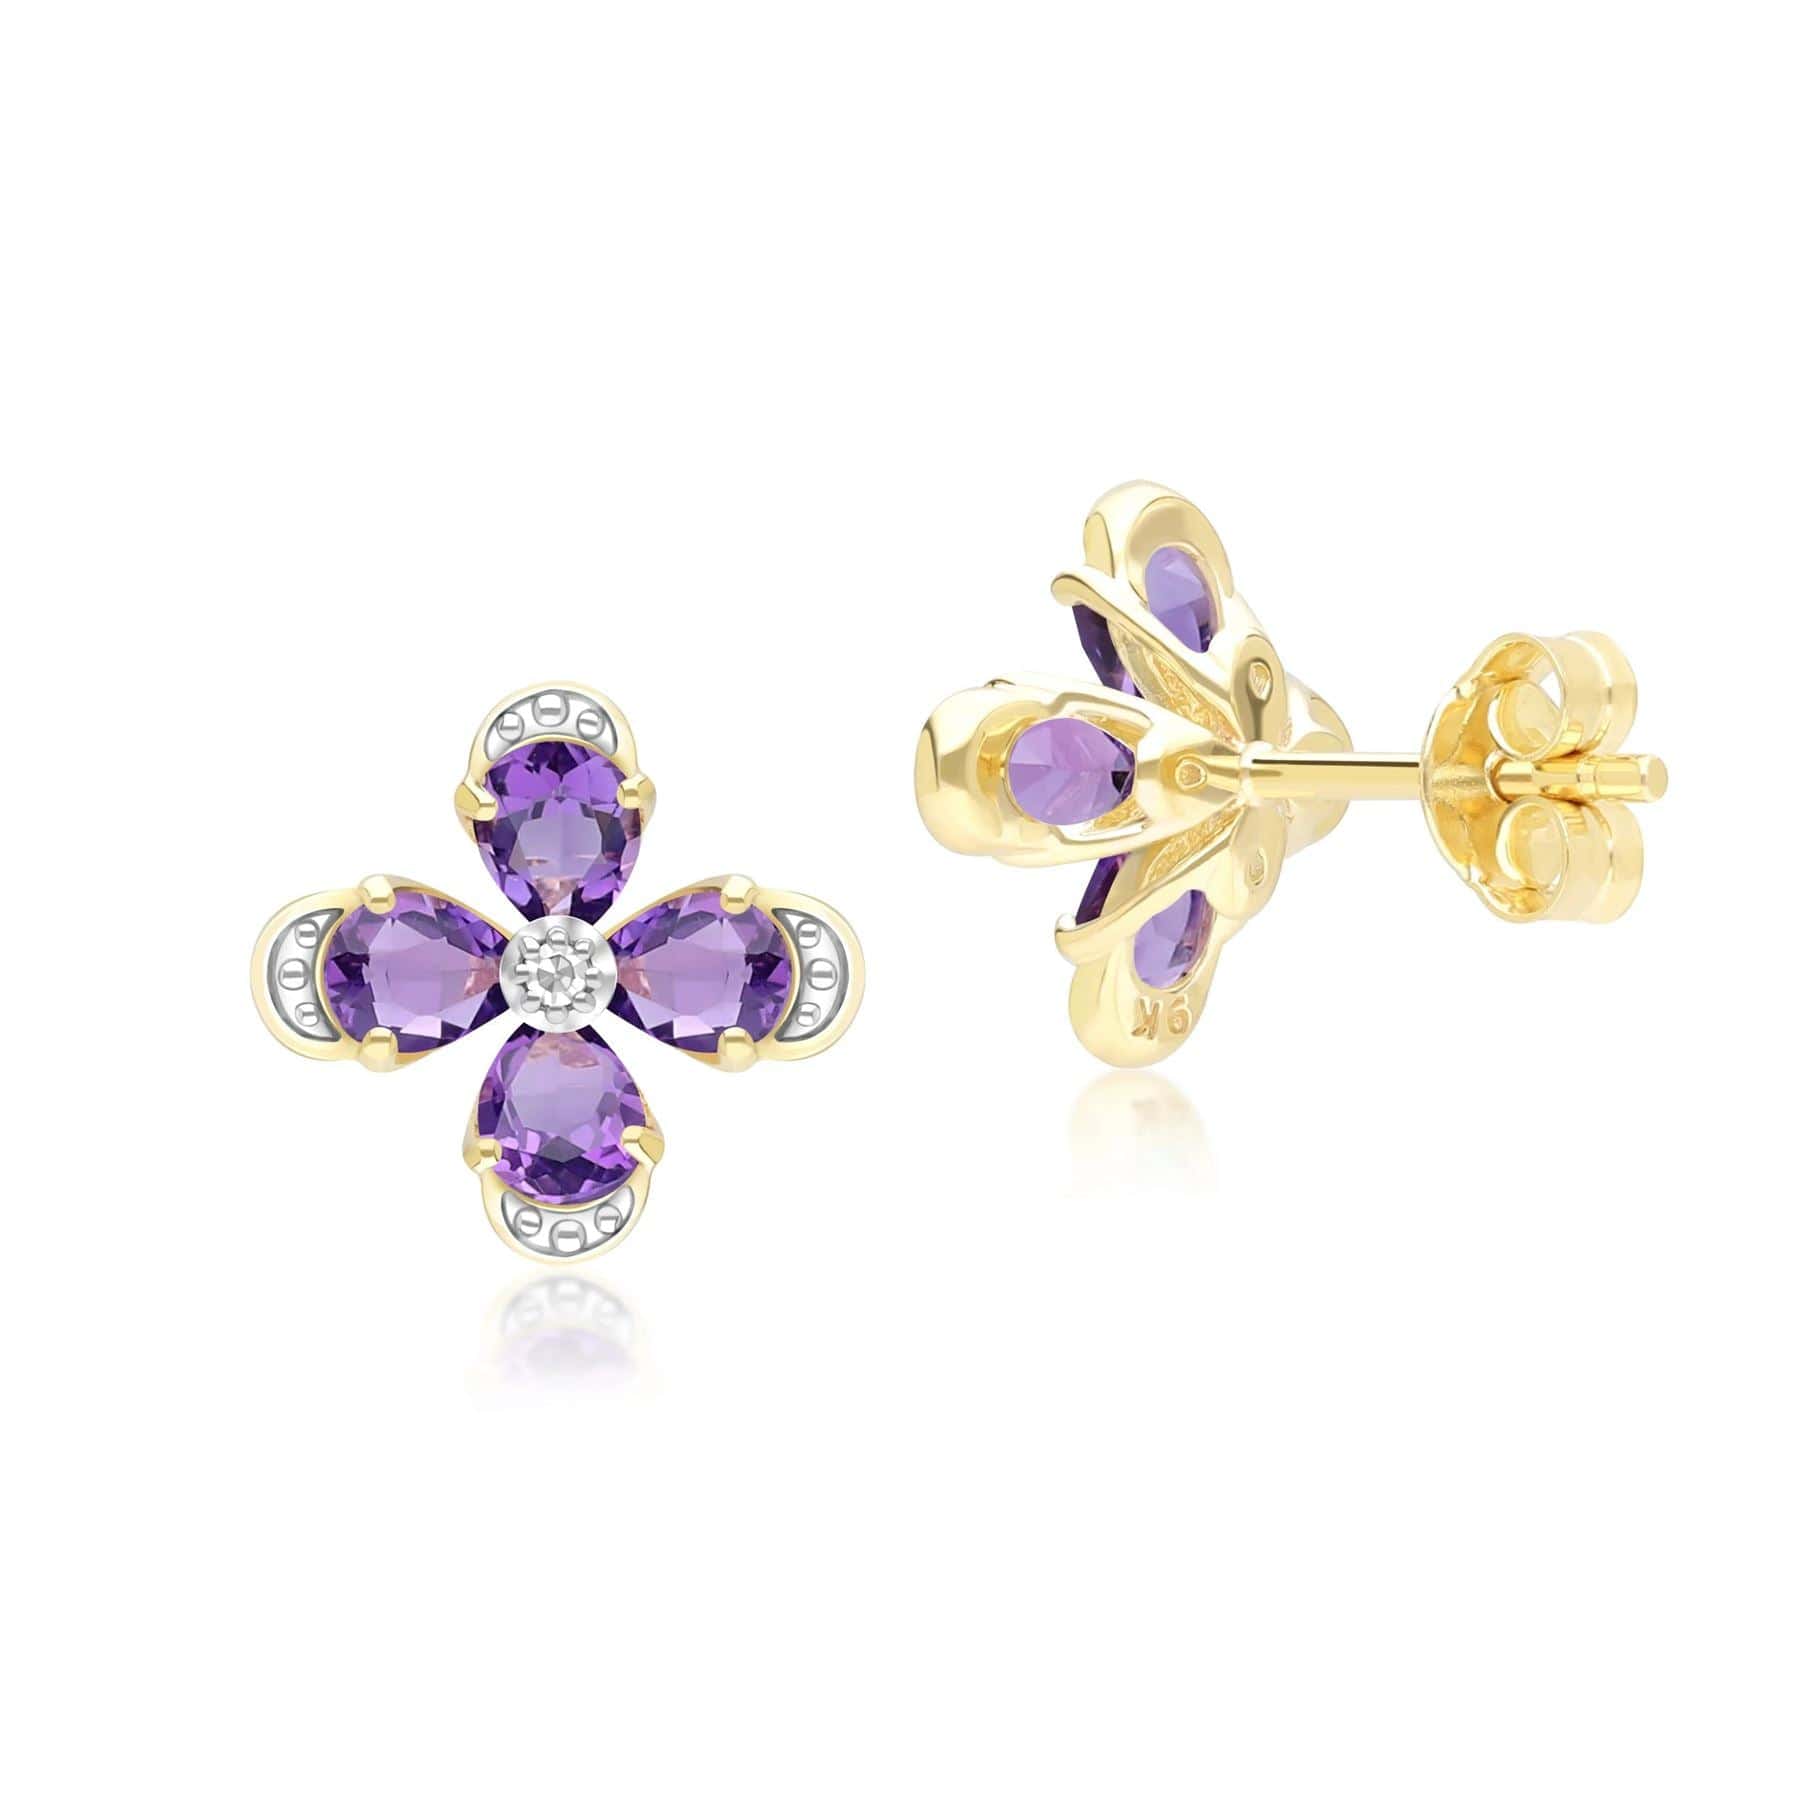 Floral Amethyst & Diamond Stud Earrings in 9ct Yellow Gold